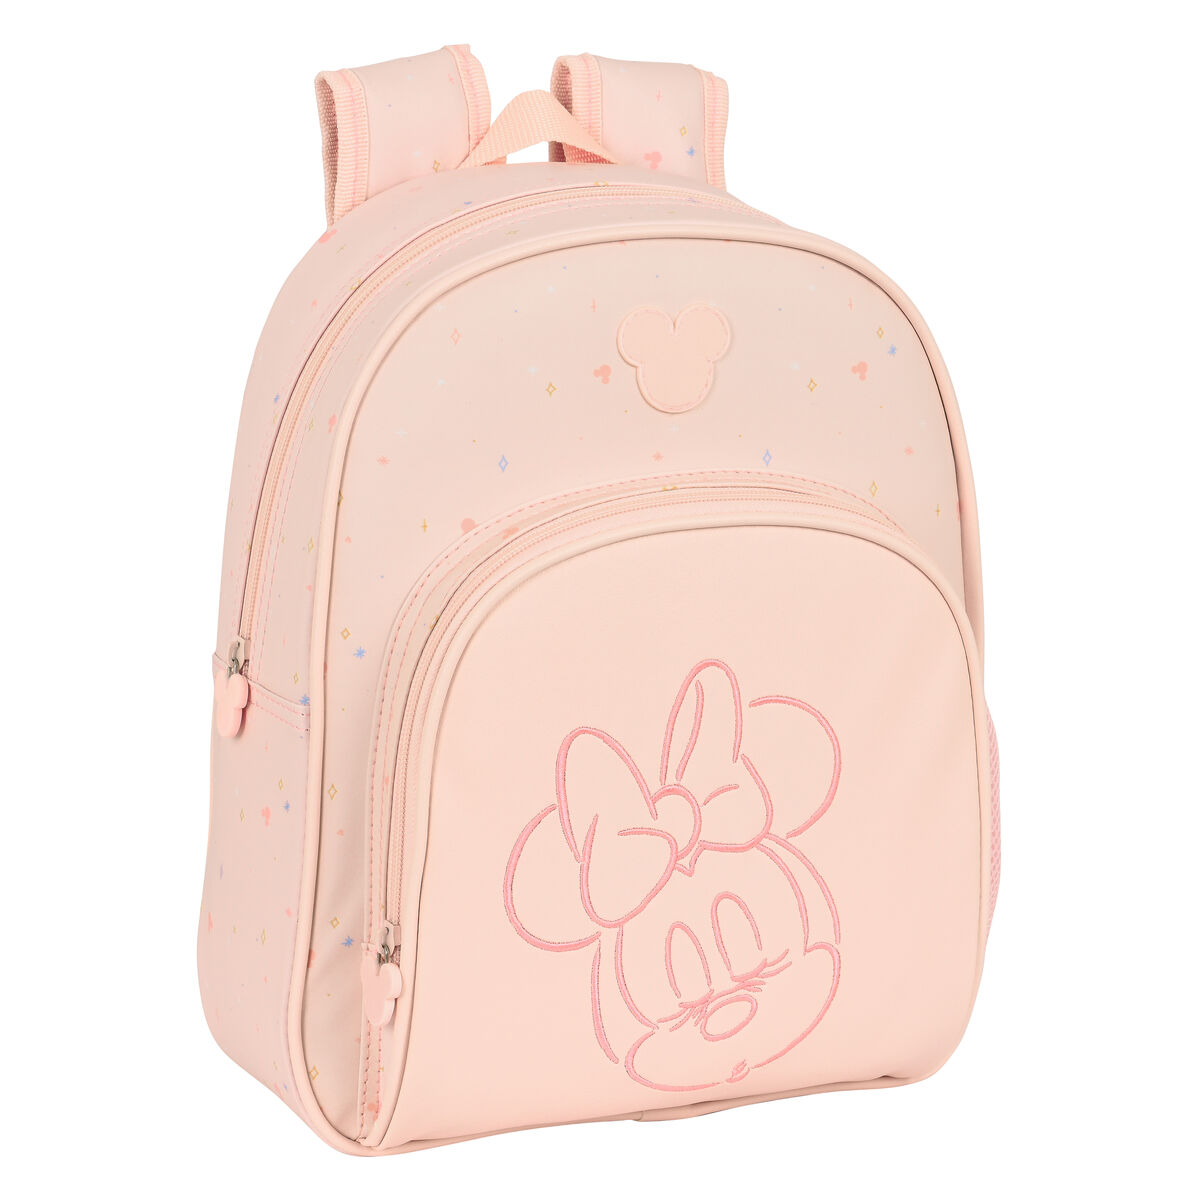 Minnie mouse Kinder-Rucksack Minnie Mouse Baby Rosa 28 x 34 x 10 cm